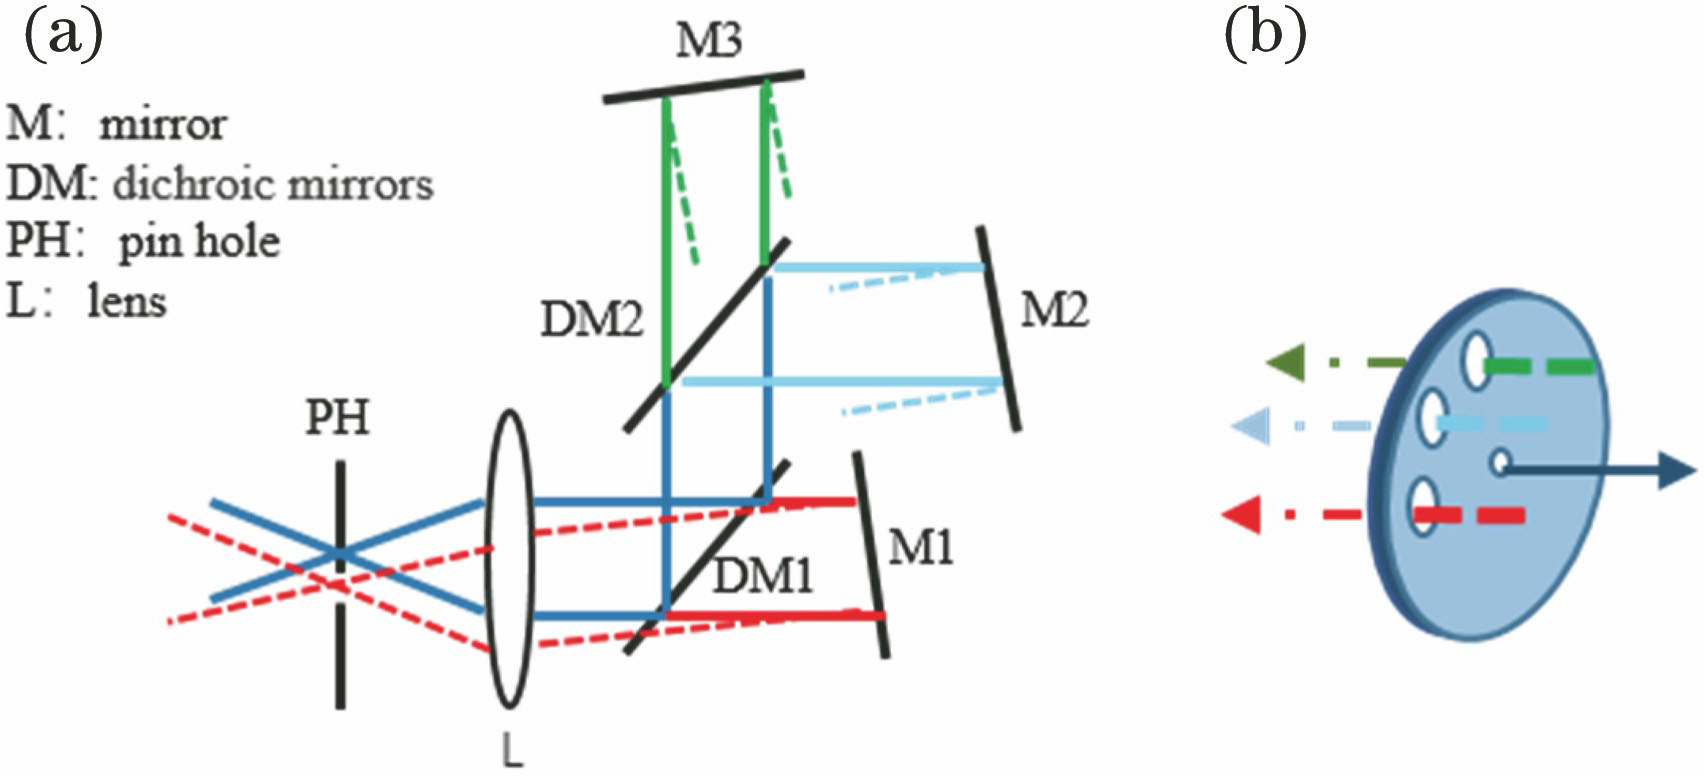 Reference wave quasi common path method using dichroic mirrors[27]. (a) Optical setup; (b) pinhole structure